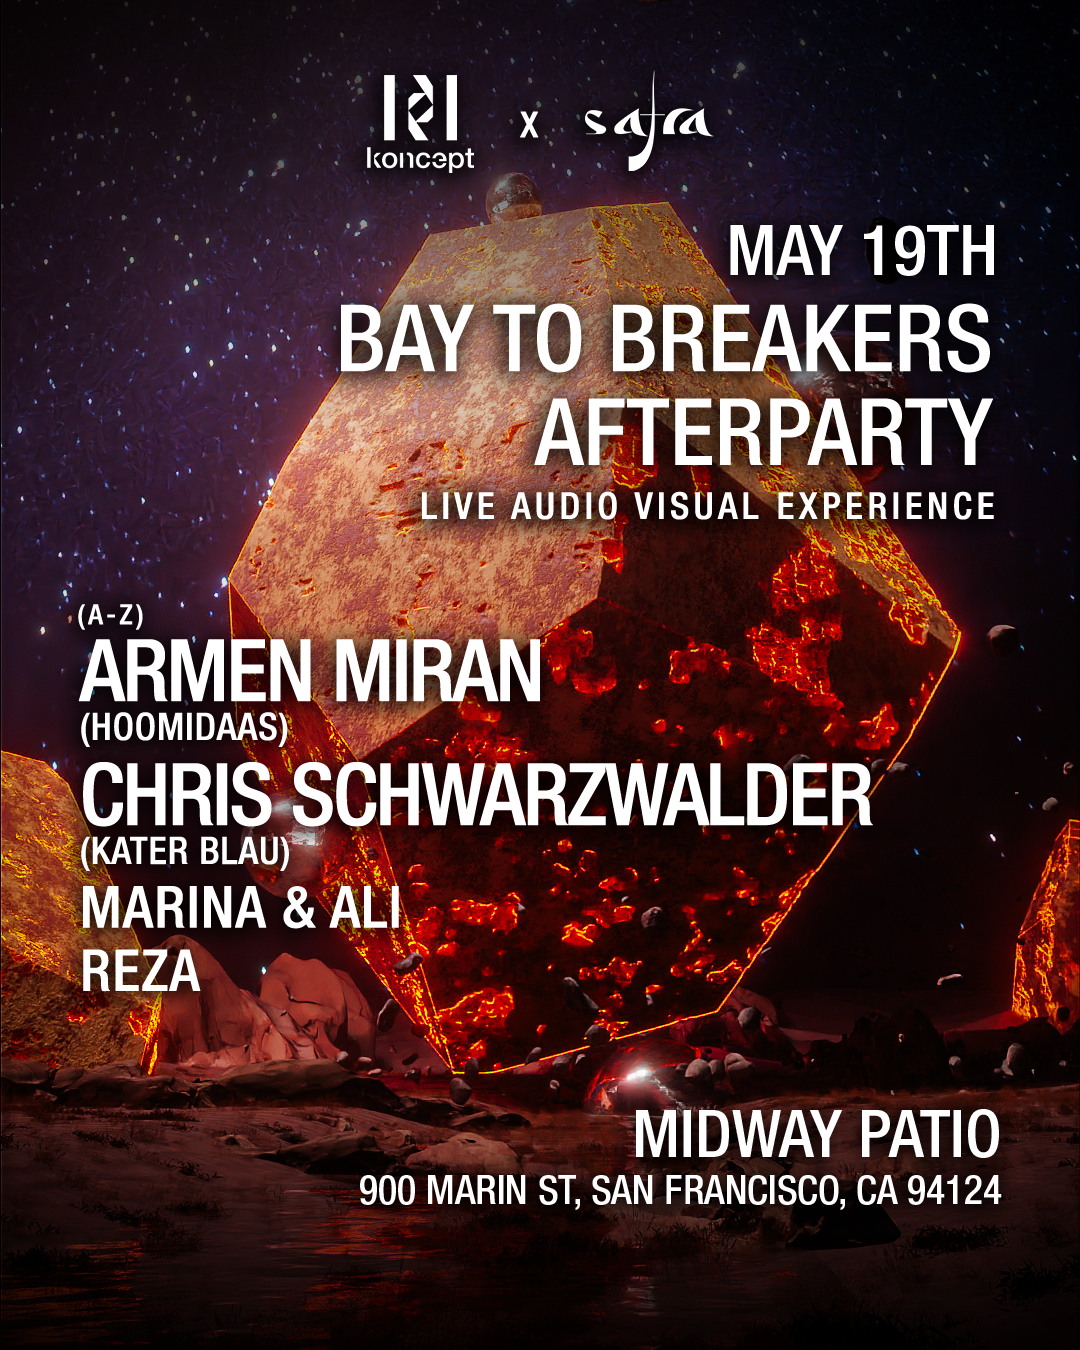 Koncept x Safra present Bay to Breakers Afterparty - フライヤー表